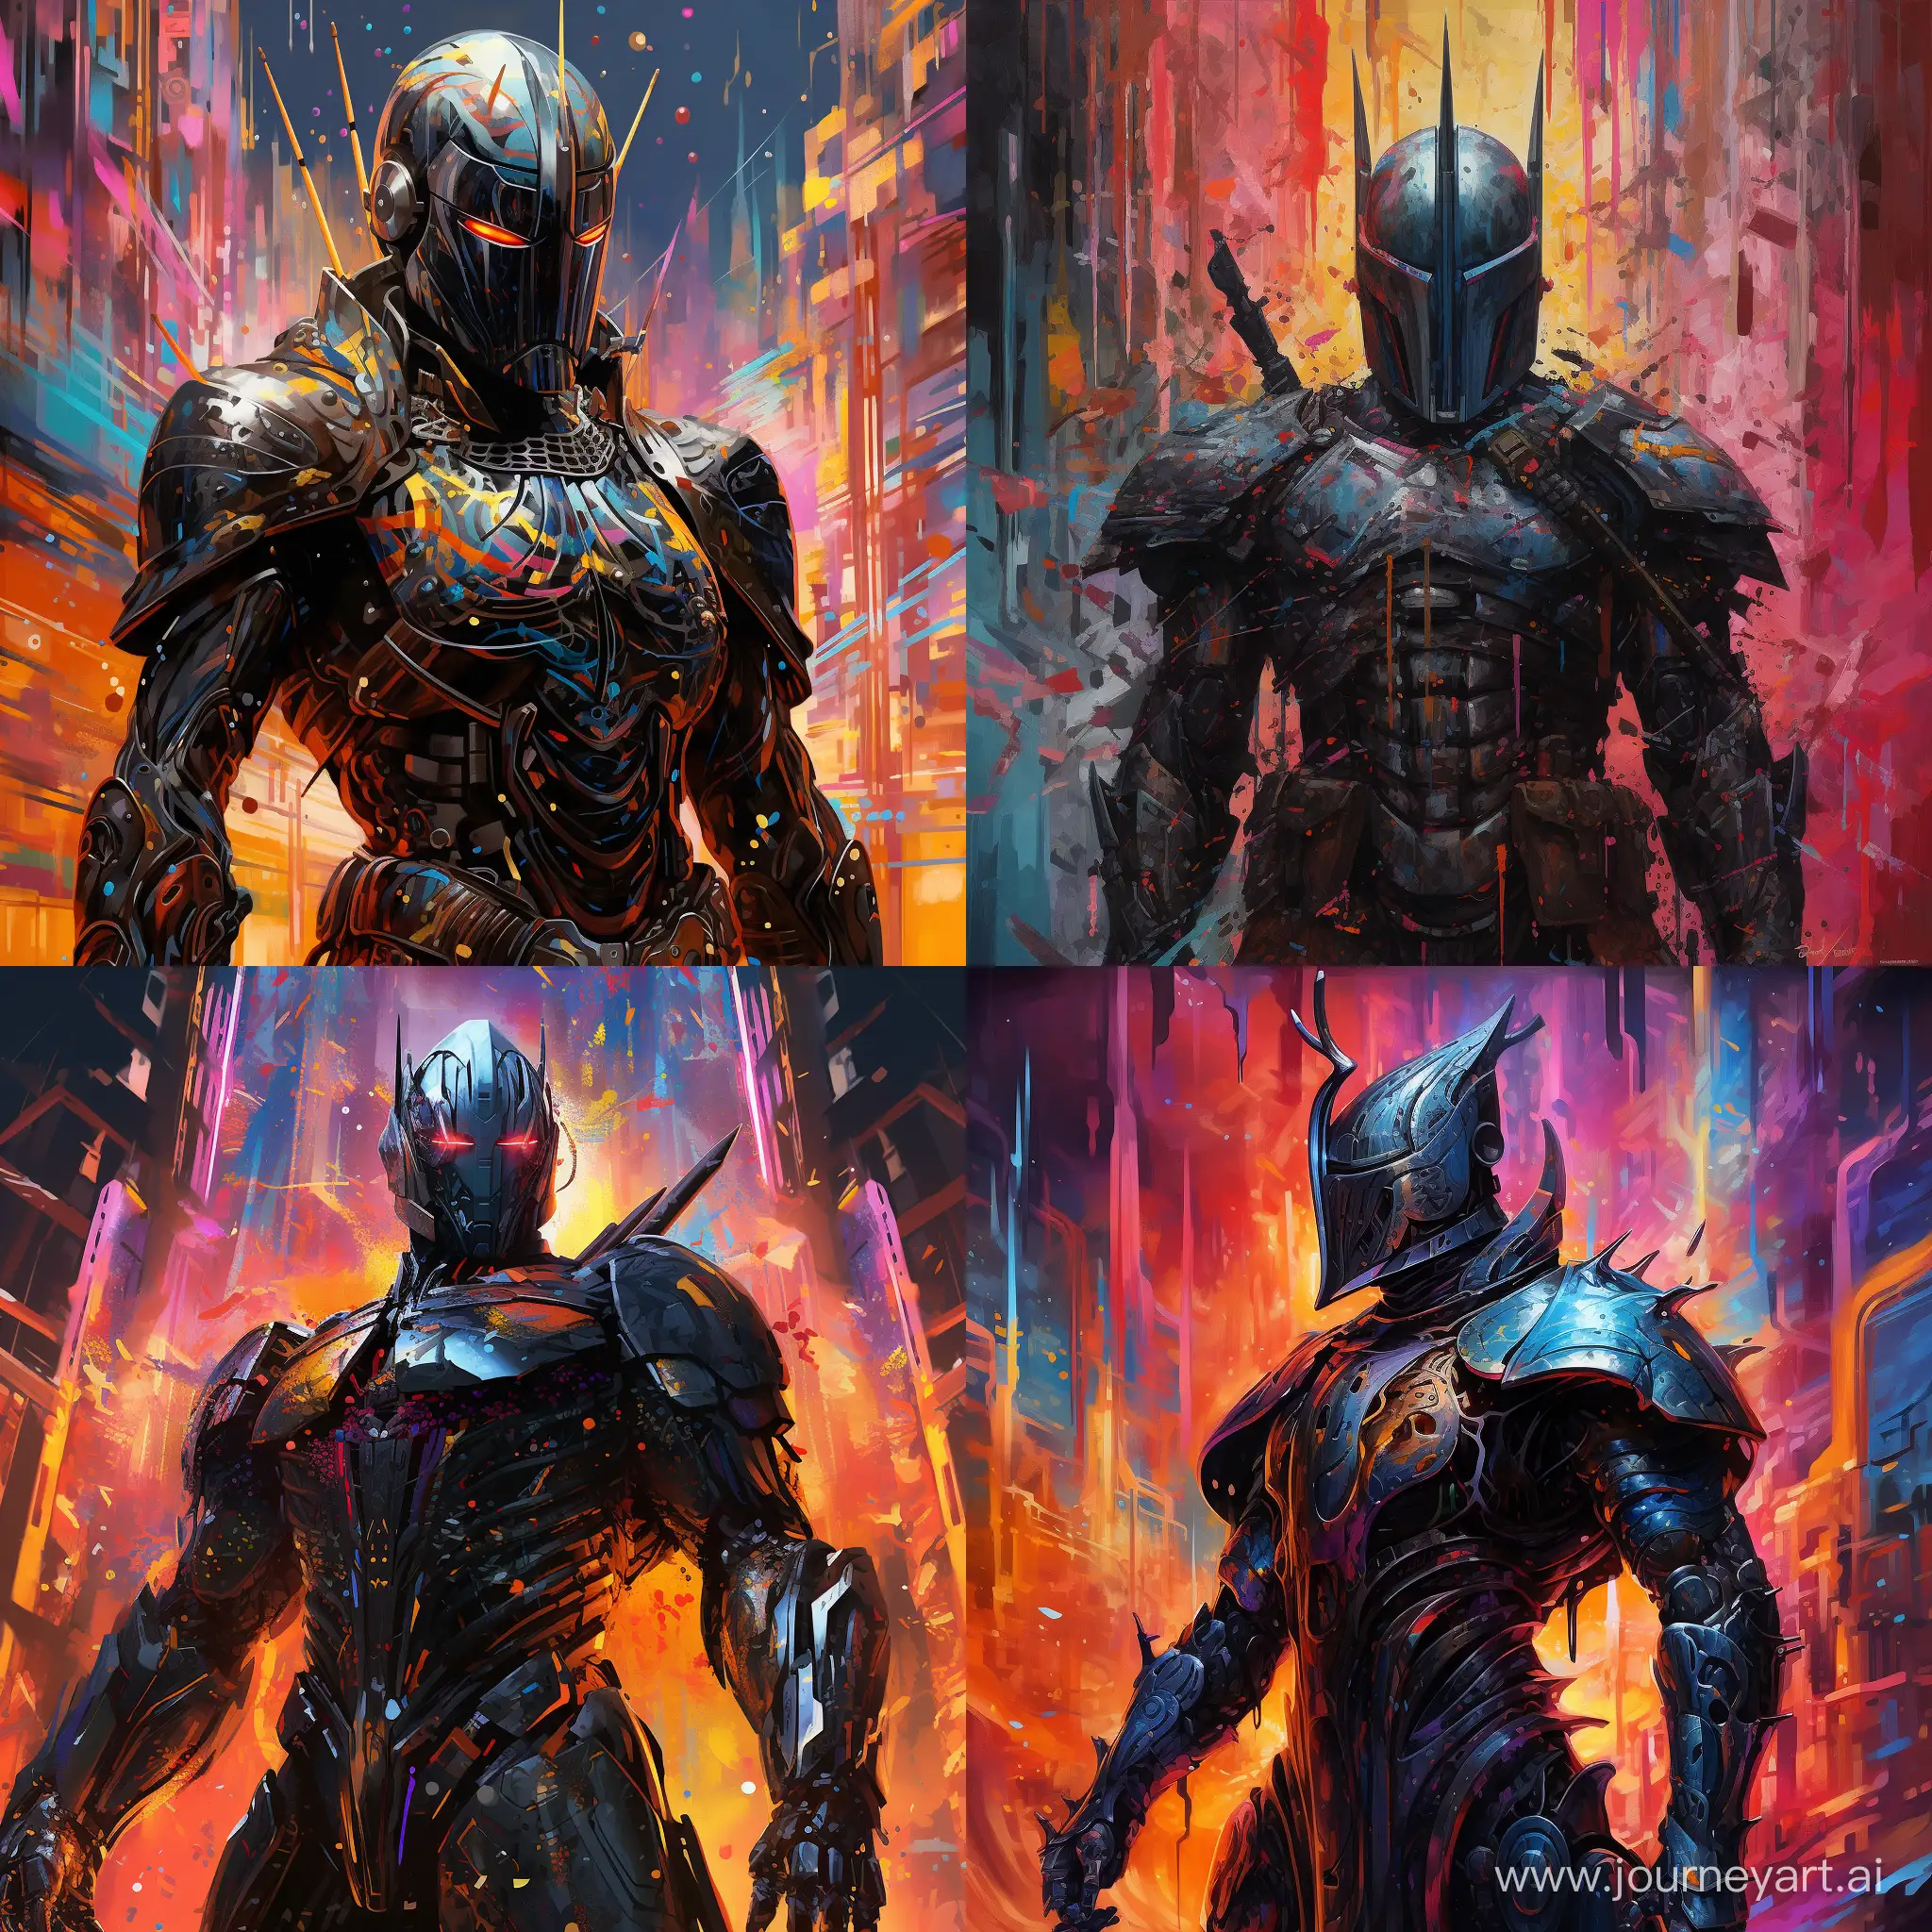 Cyberpunk-Black-Knight-Vibrant-Armor-and-Explosive-Abstraction